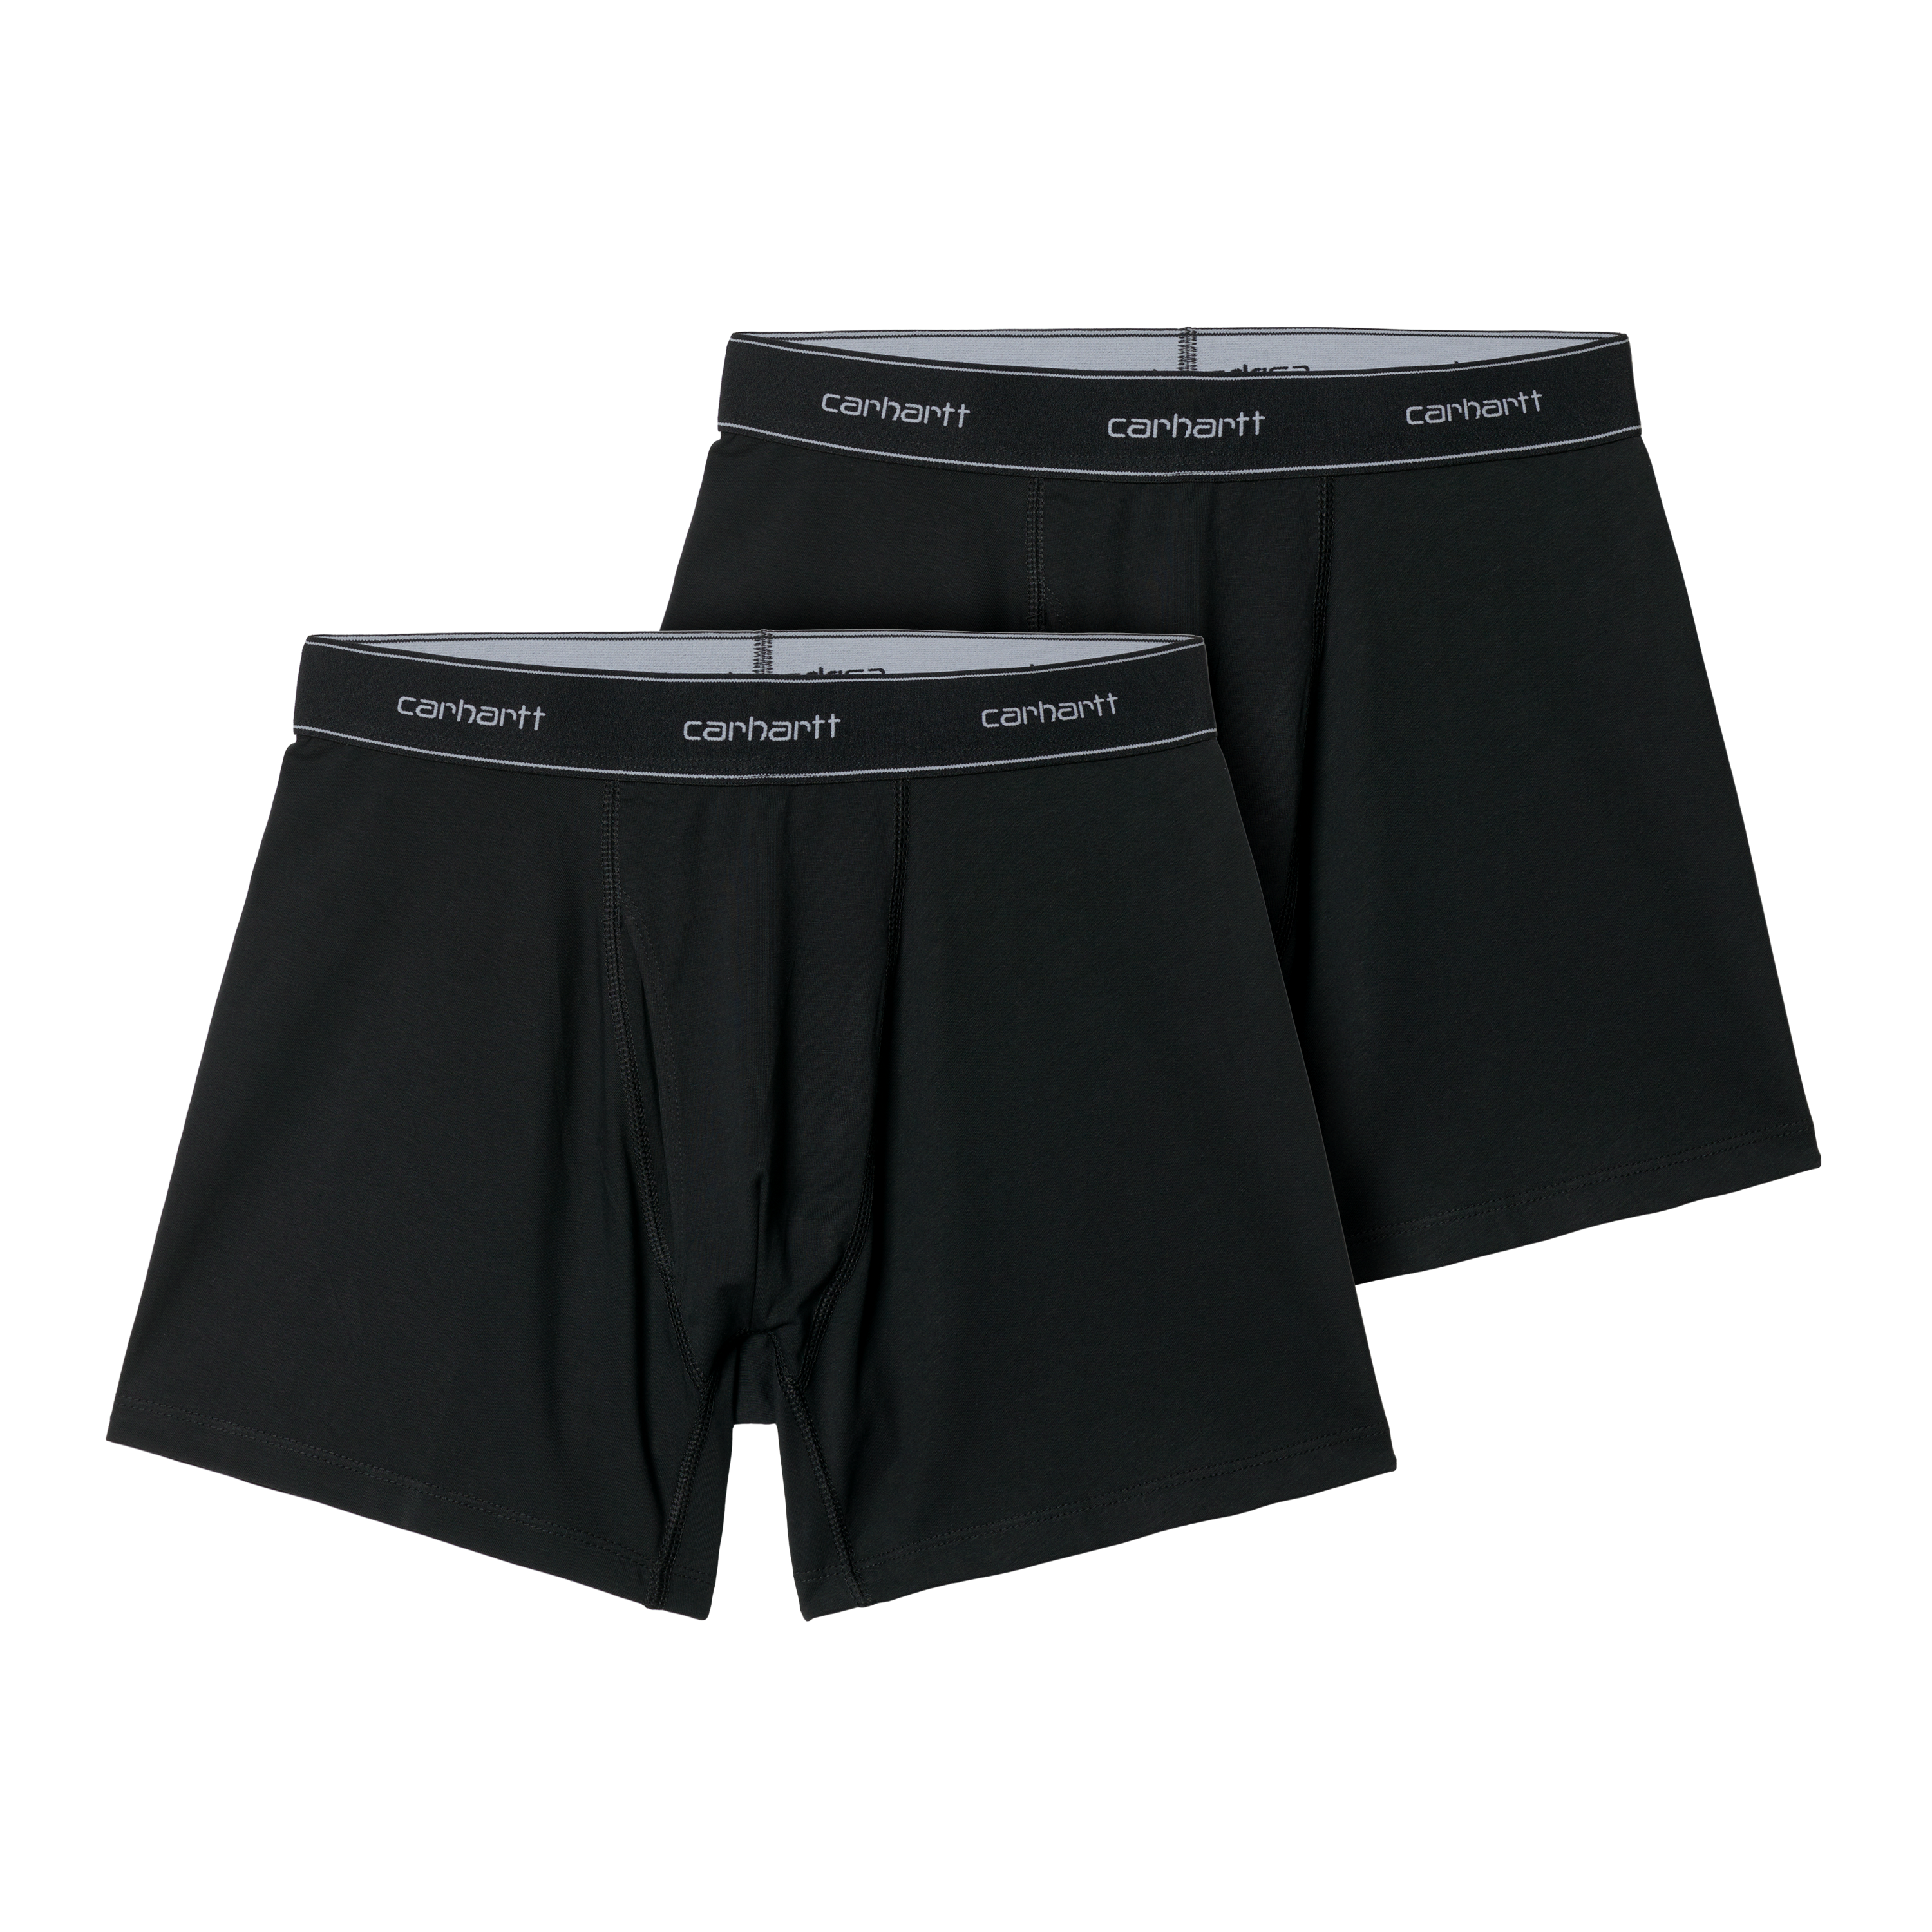 Carhartt Base Force 8 Inch Boxer Brief